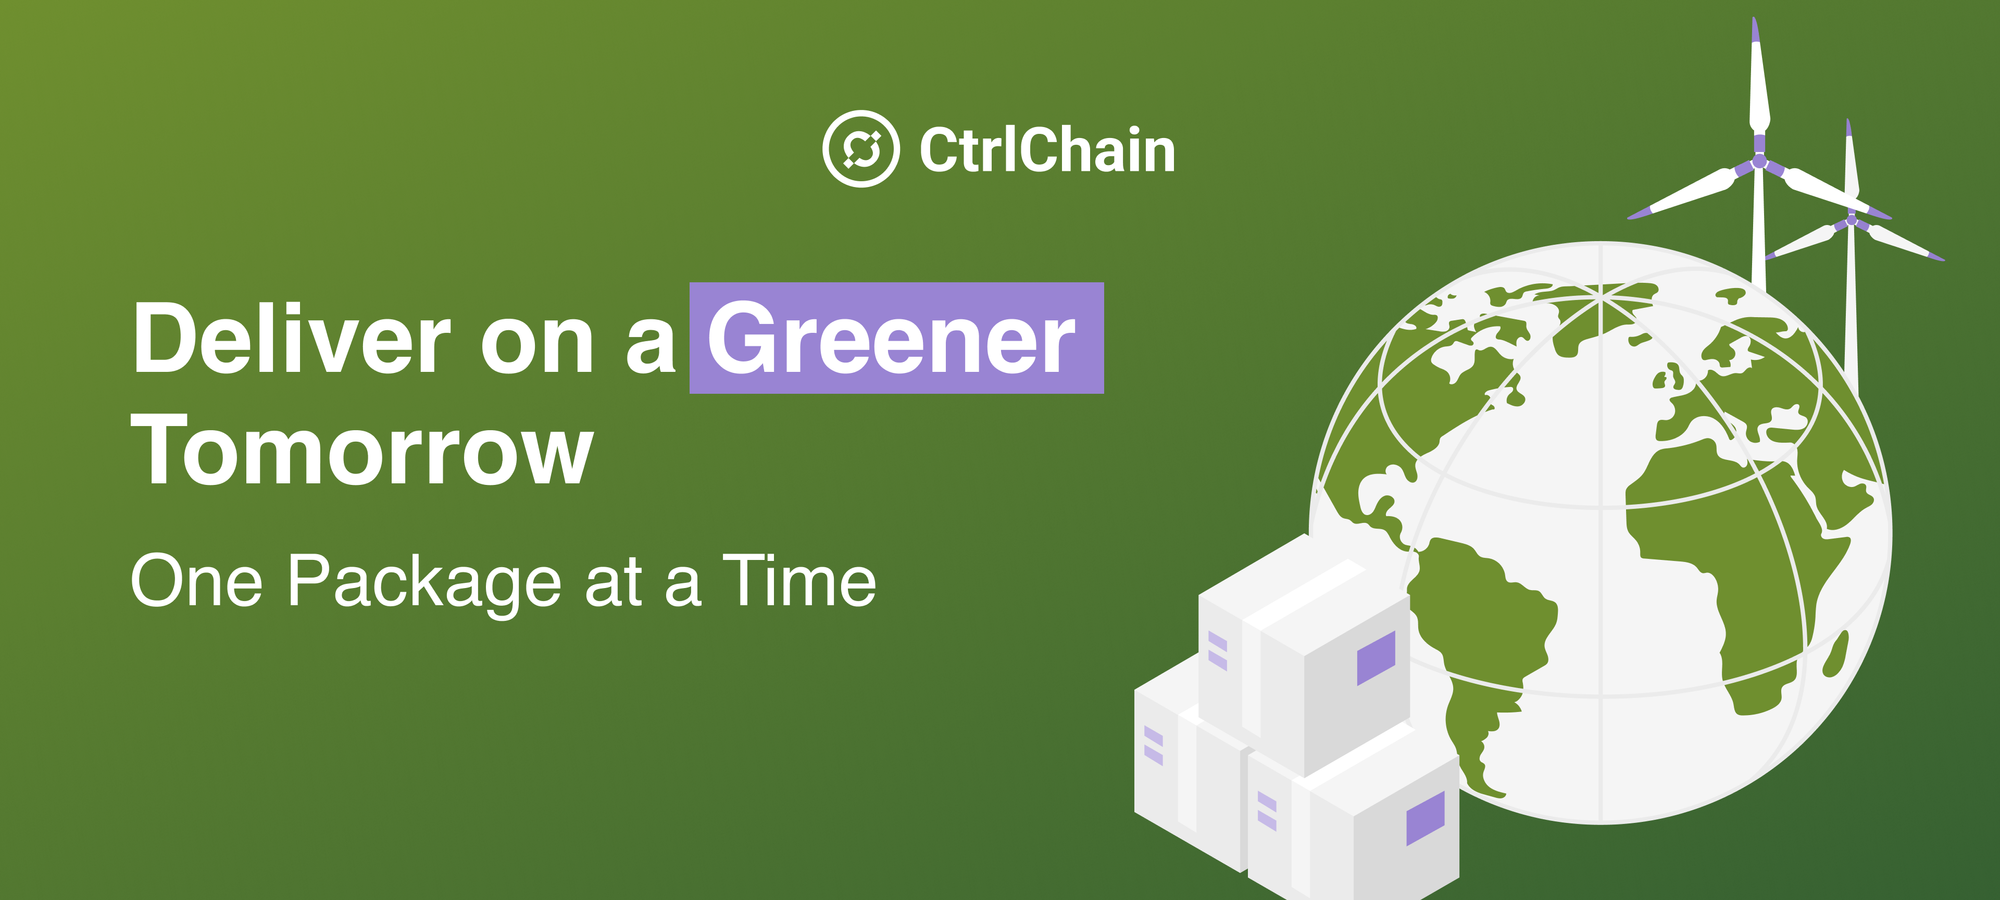 Deliver on a Greener Tomorrow, One Package at a Time